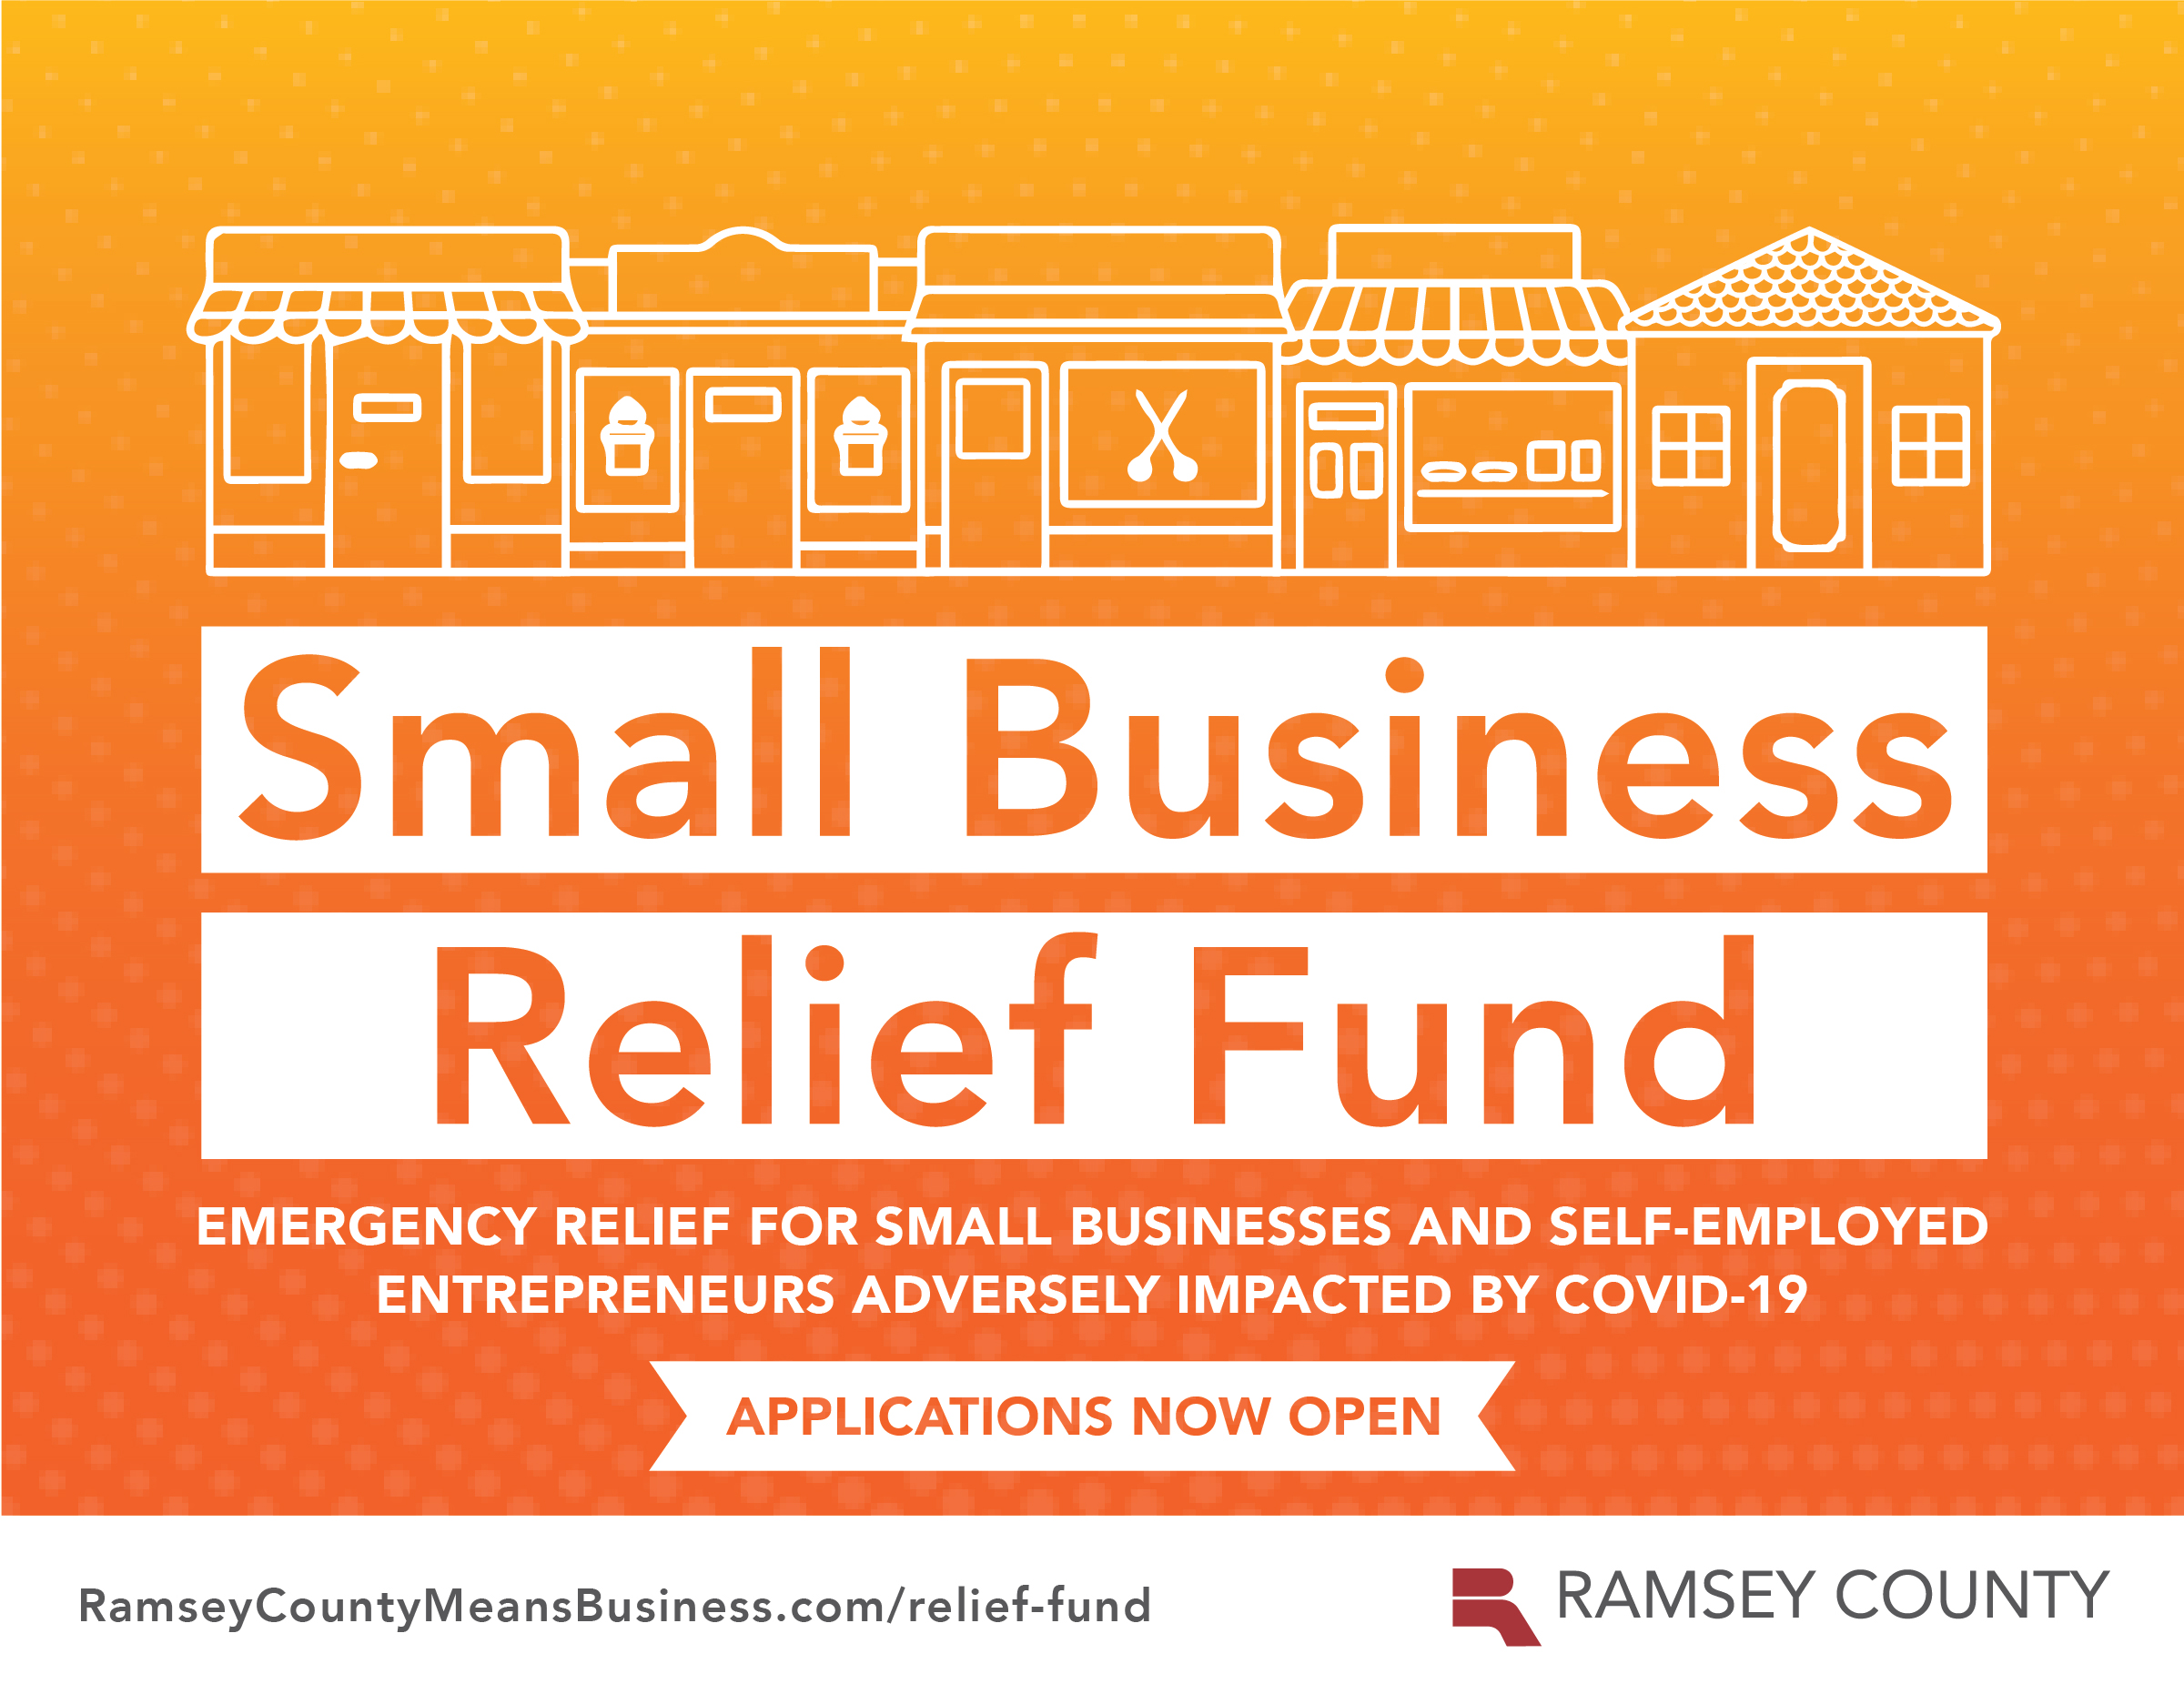 Applications open for Small Business Relief Fund grants Ramsey County